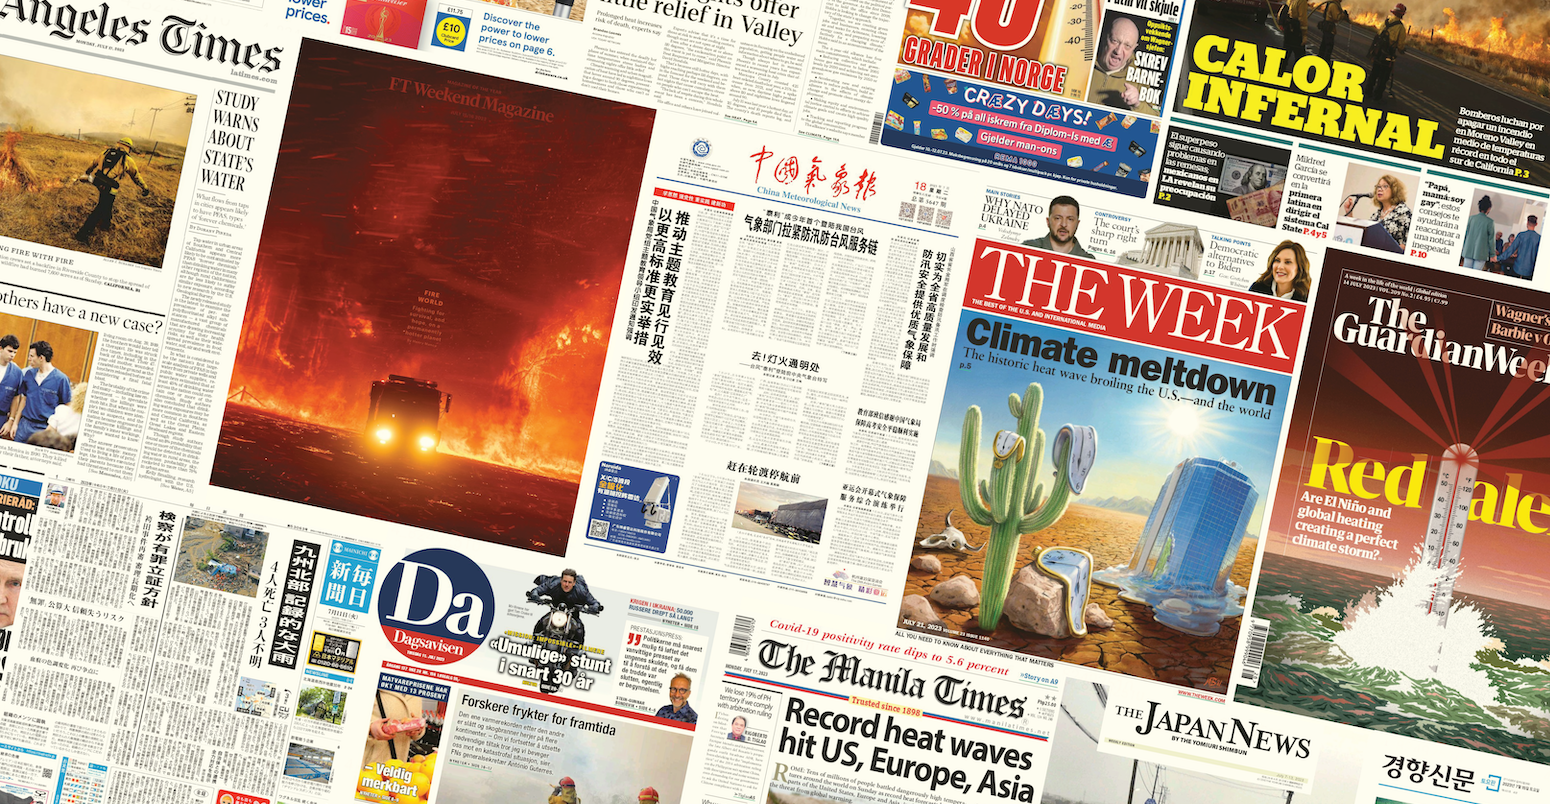 Montage of newspapers by Joe Goodman for Carbon Brief.